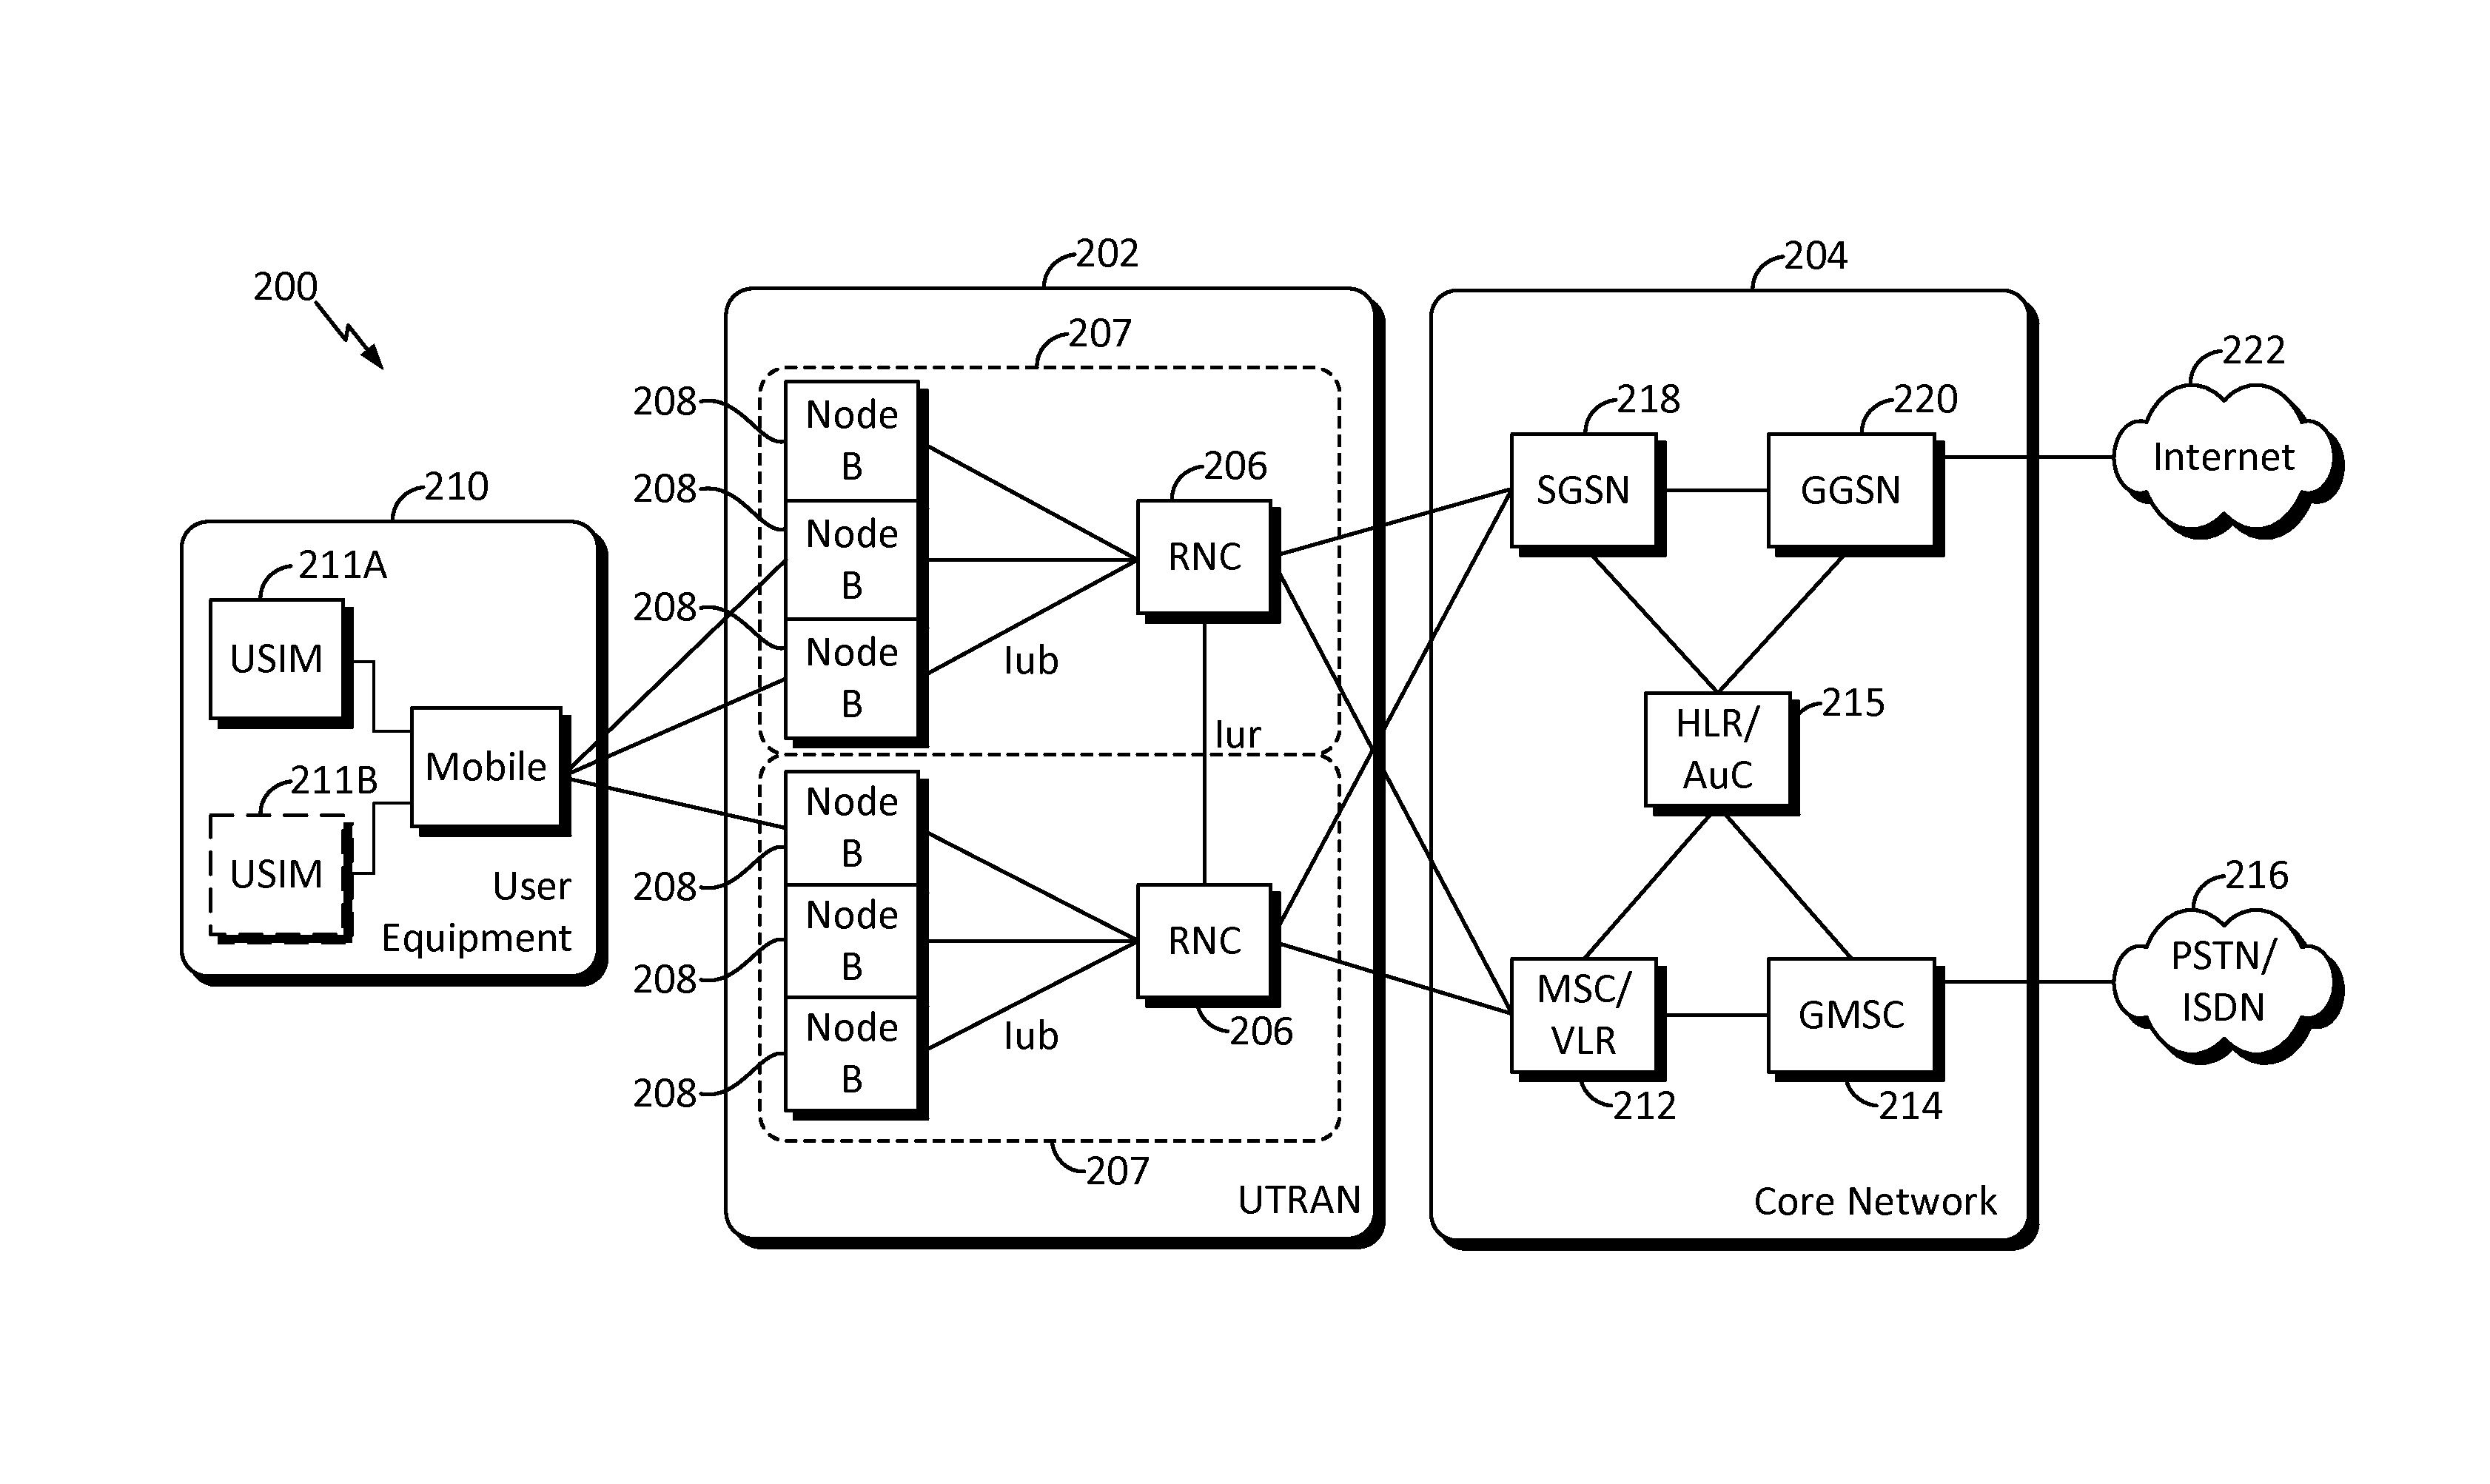 Apparatus and method for employing a page cycle learning mode